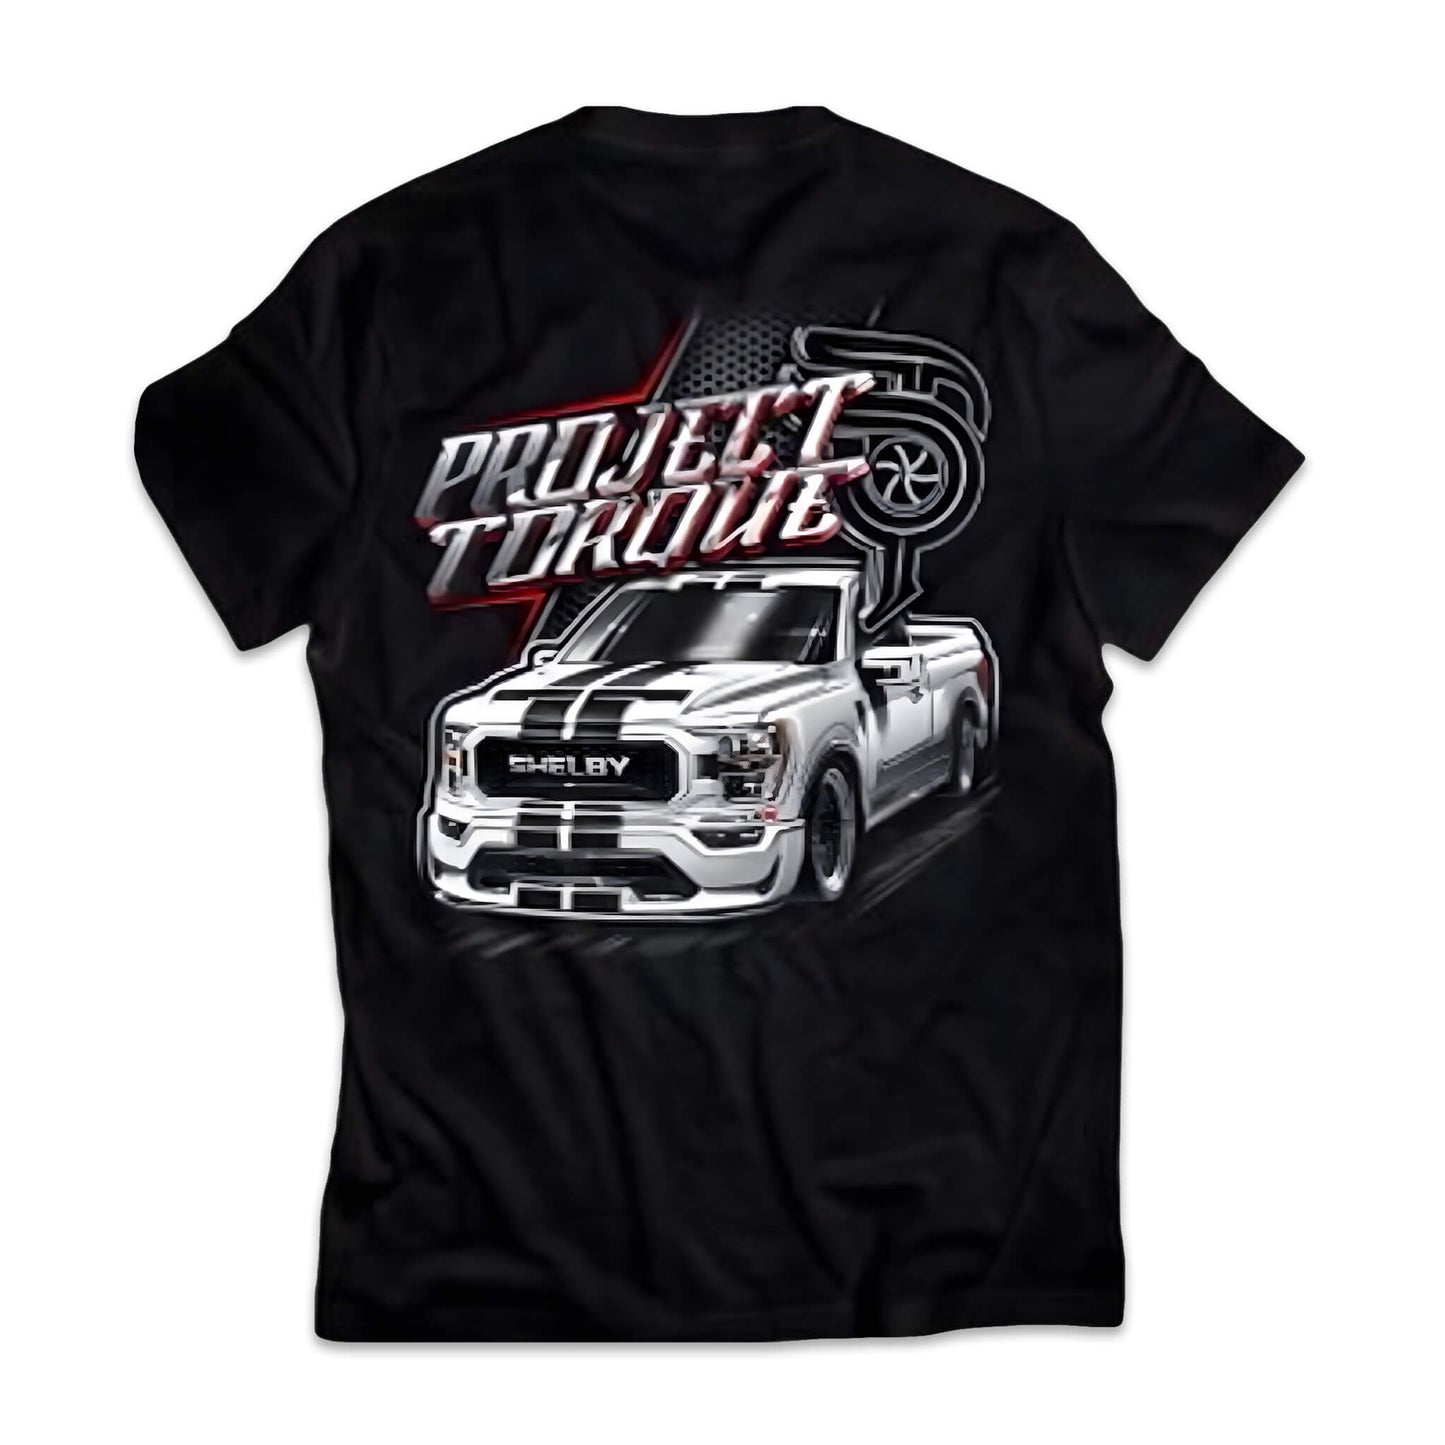 WHITE SHELBY T-SHIRT